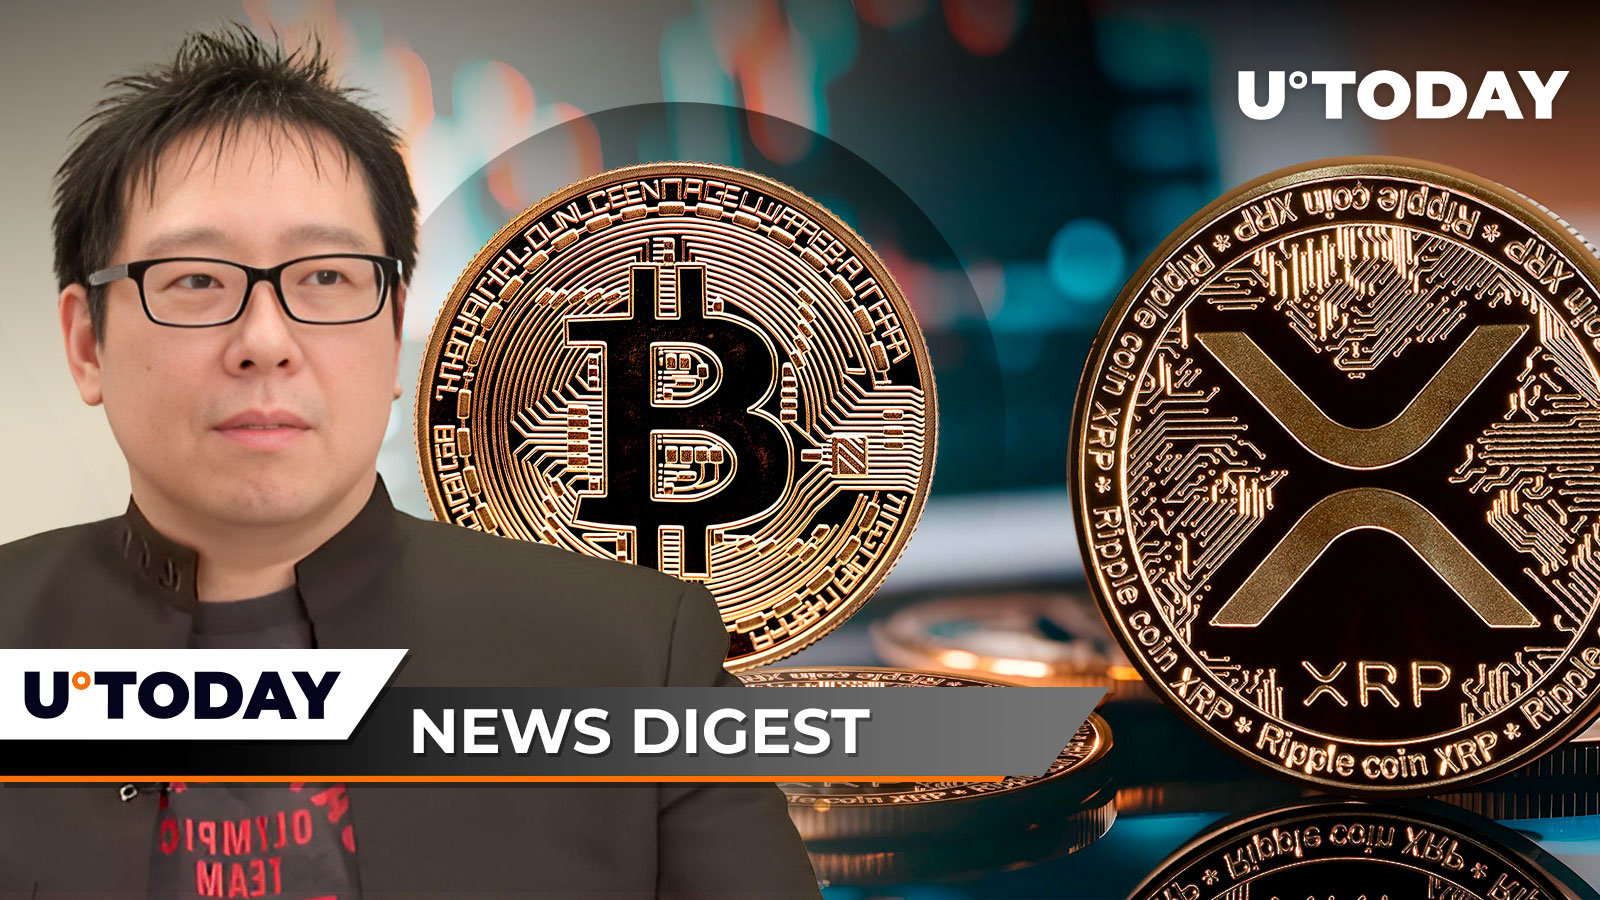 3.6 Billion XRP in 24 Hours, Samson Mow Expects 'Super Bullish Bitcoin News' Soon, Ethereum ETFs Witness Massive Outflows: Crypto News Digest by U.Today